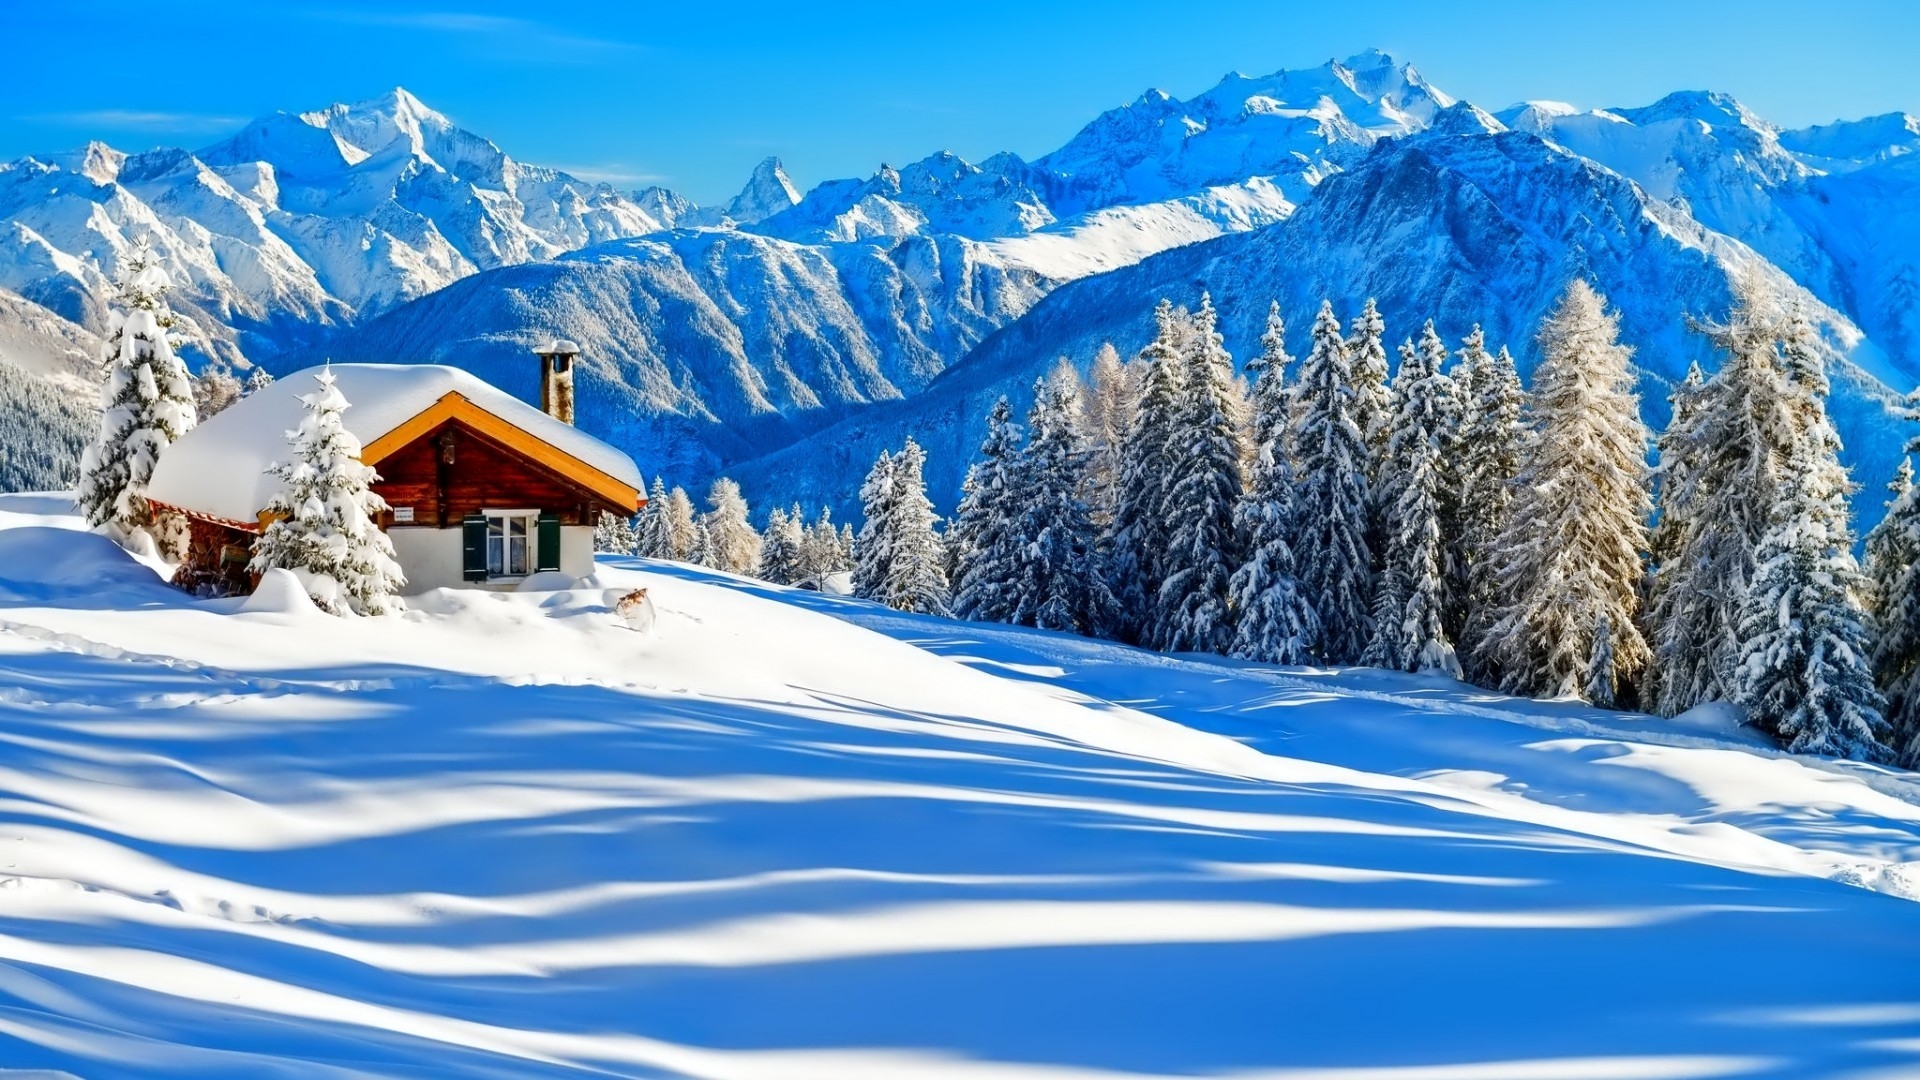 Winter full hd, hdtv, fhd, 1080p wallpapers hd, desktop backgrounds  1920x1080, images and pictures